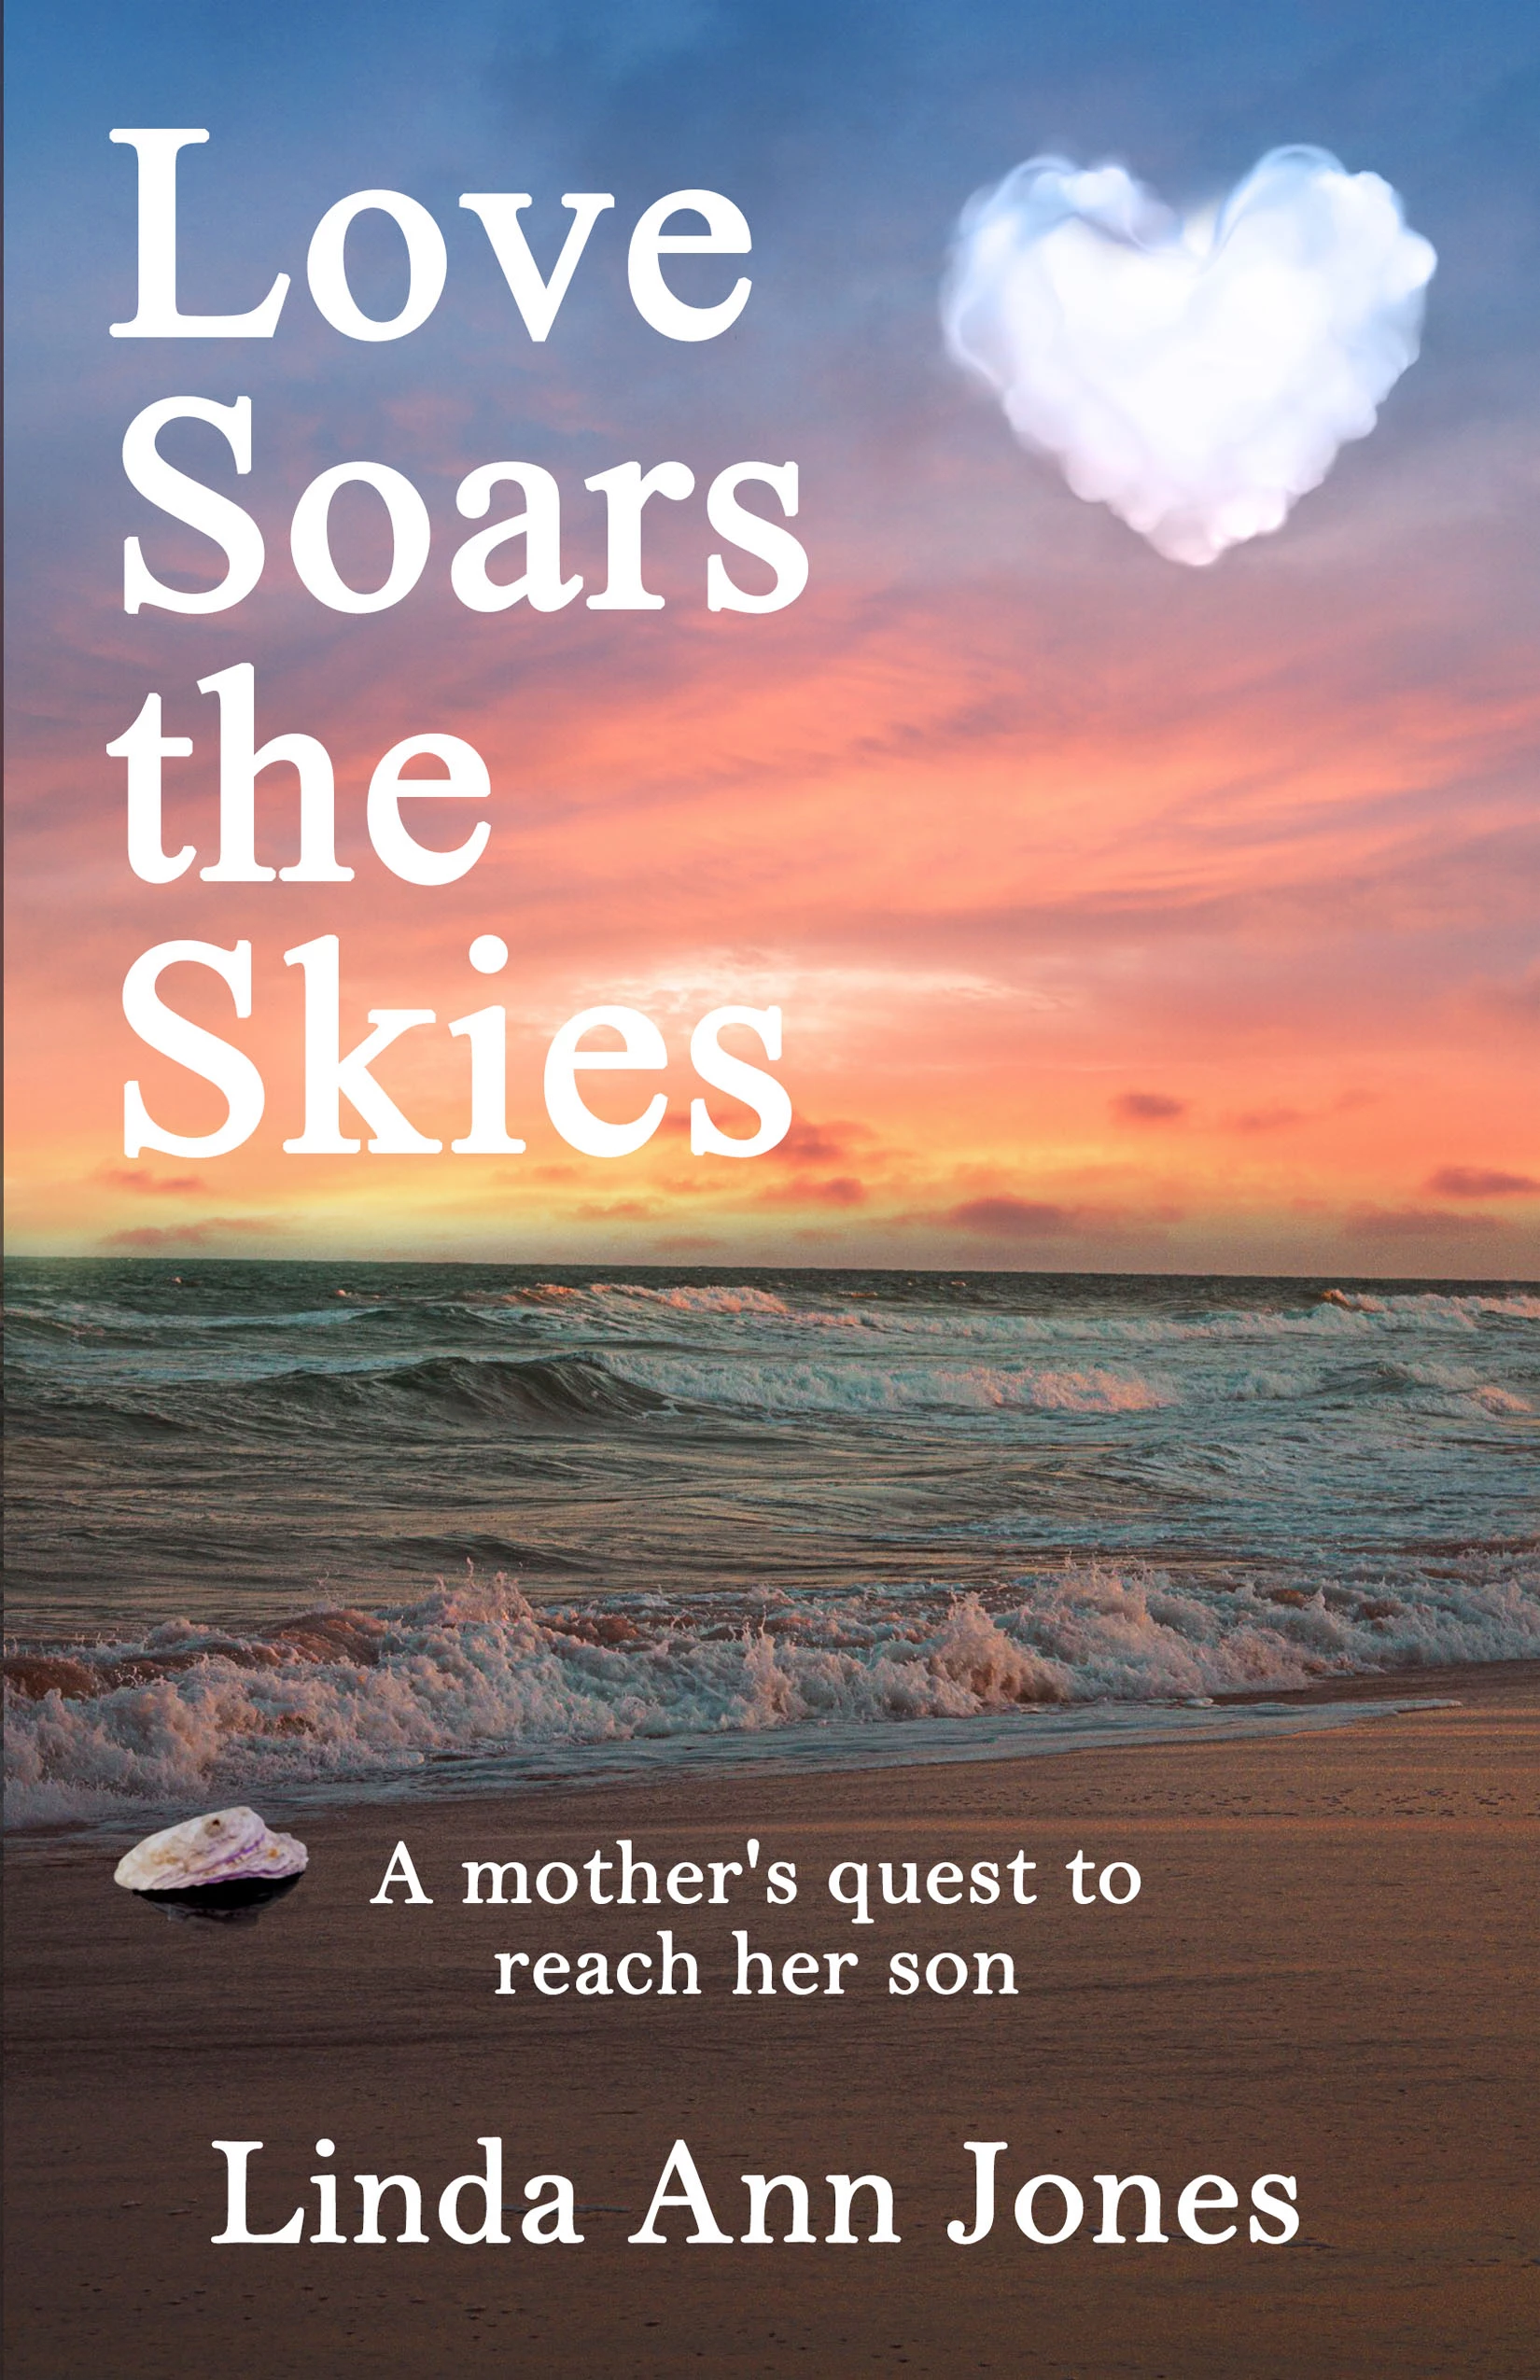 Love Soars the Skies, A mother’s quest to reach her son